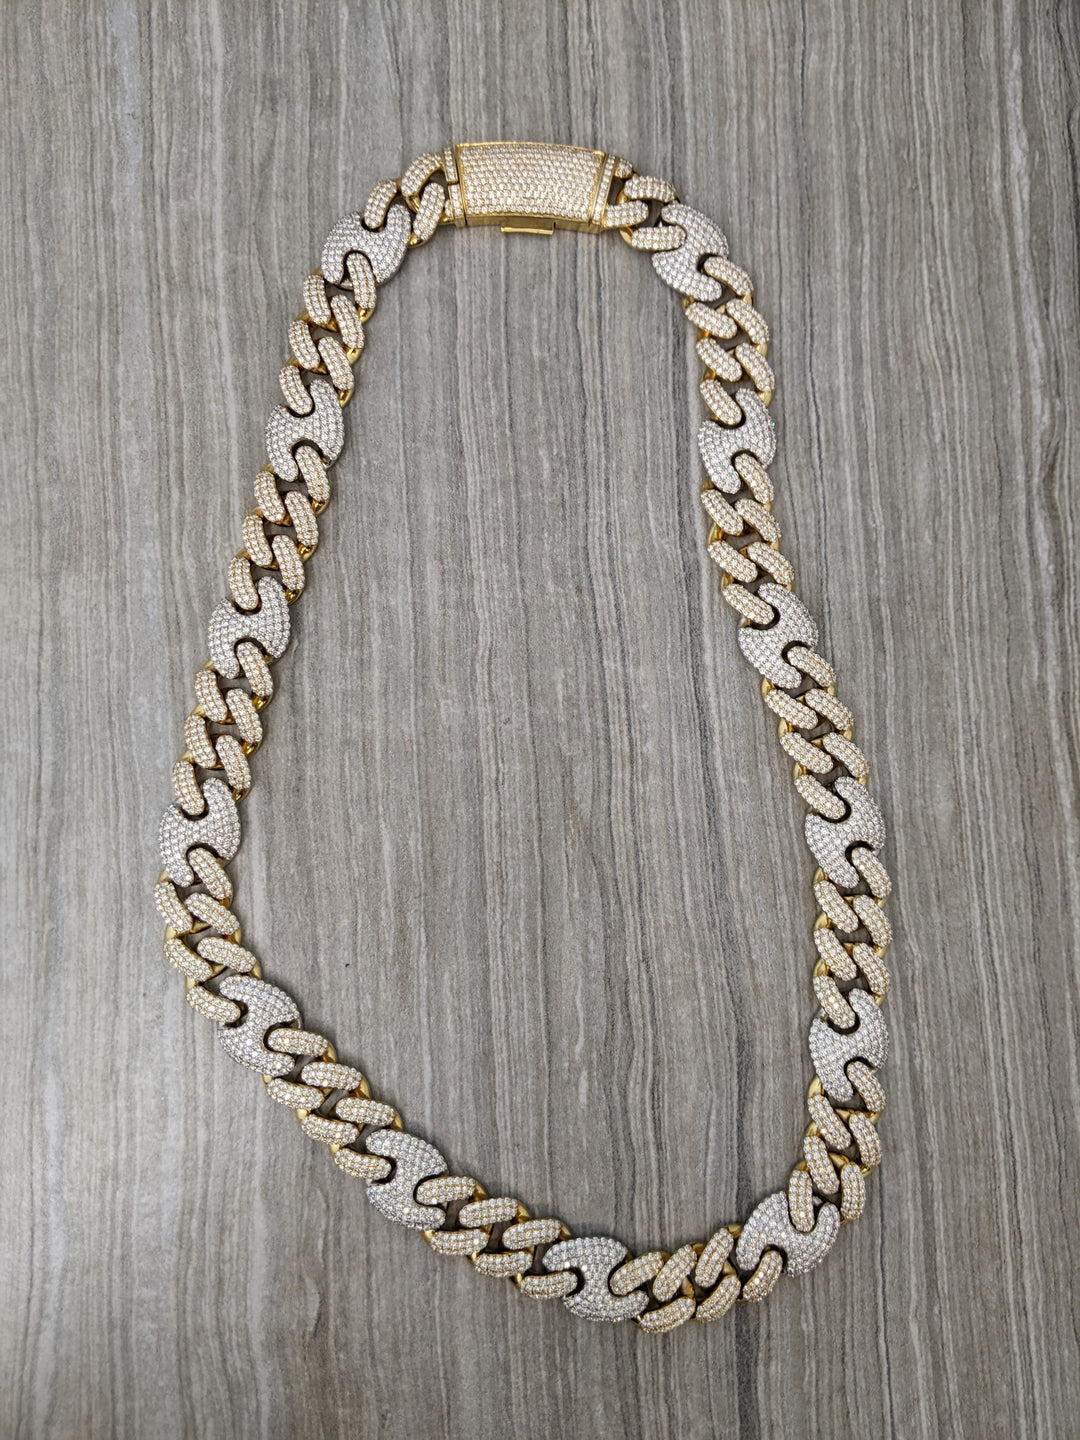 Diamond Encrusted Gucci and Cuban Link Chain Necklace - Elite Fine Jewelers